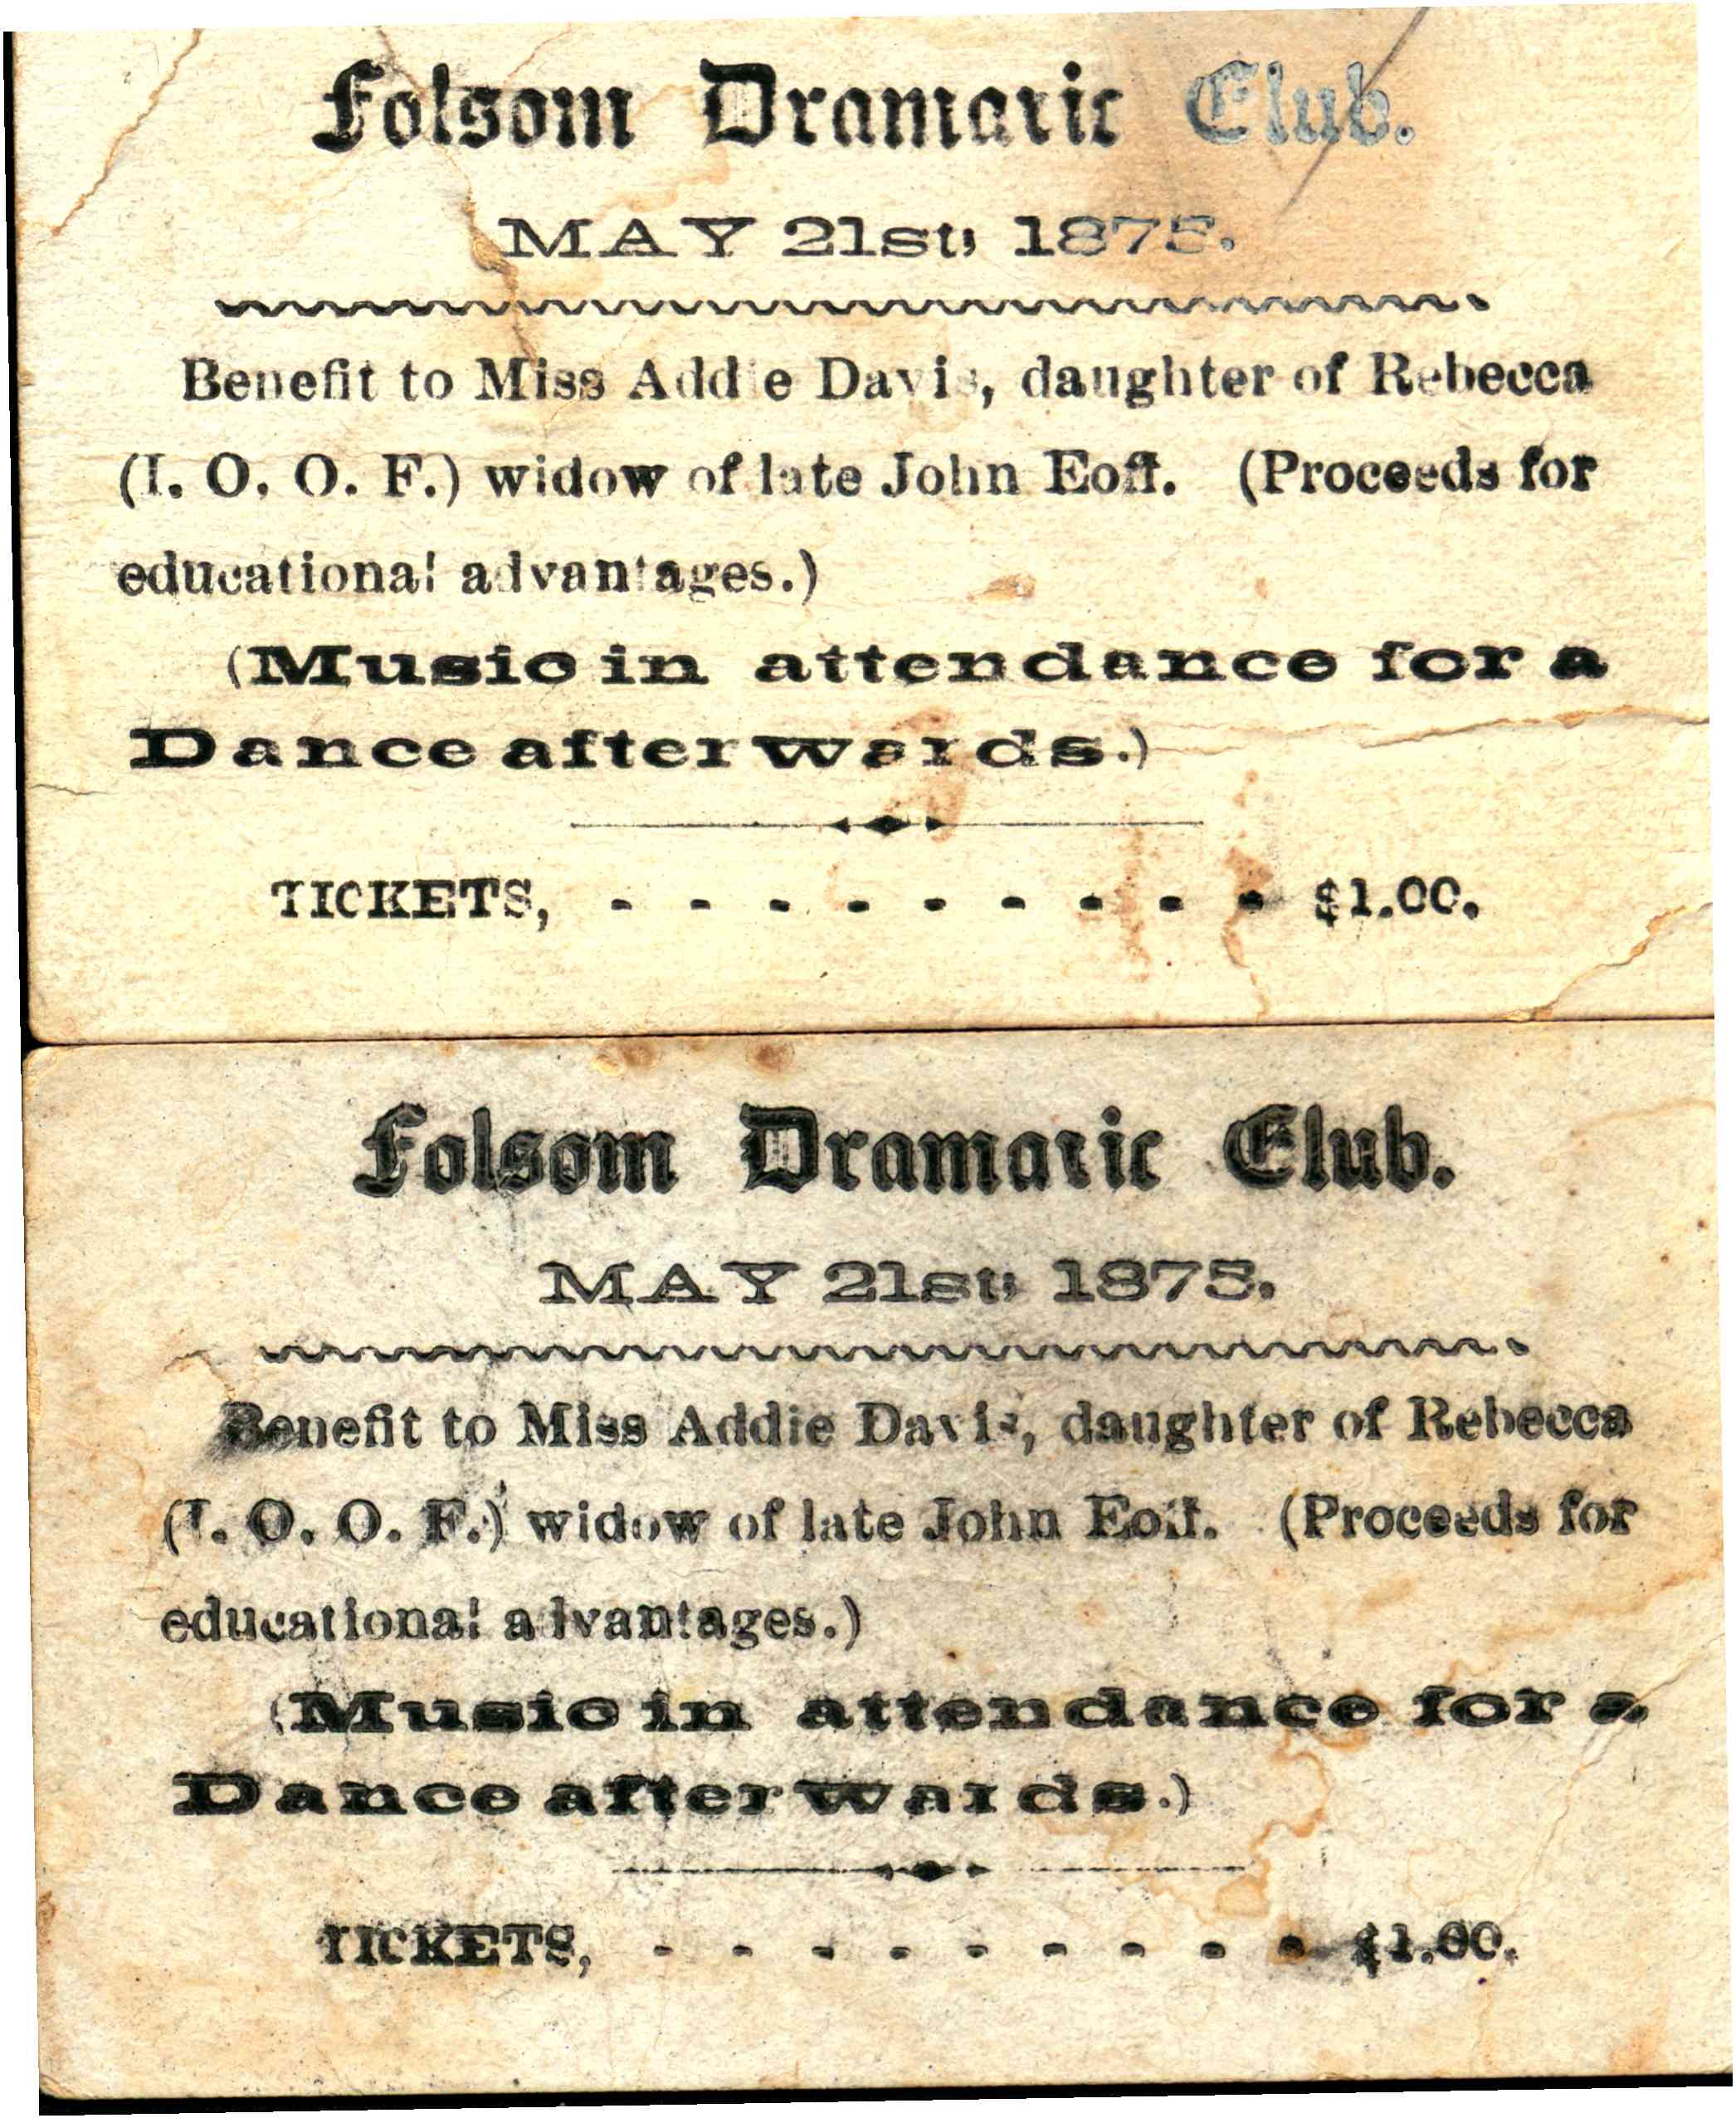 Two tickets showing showing the show date and information